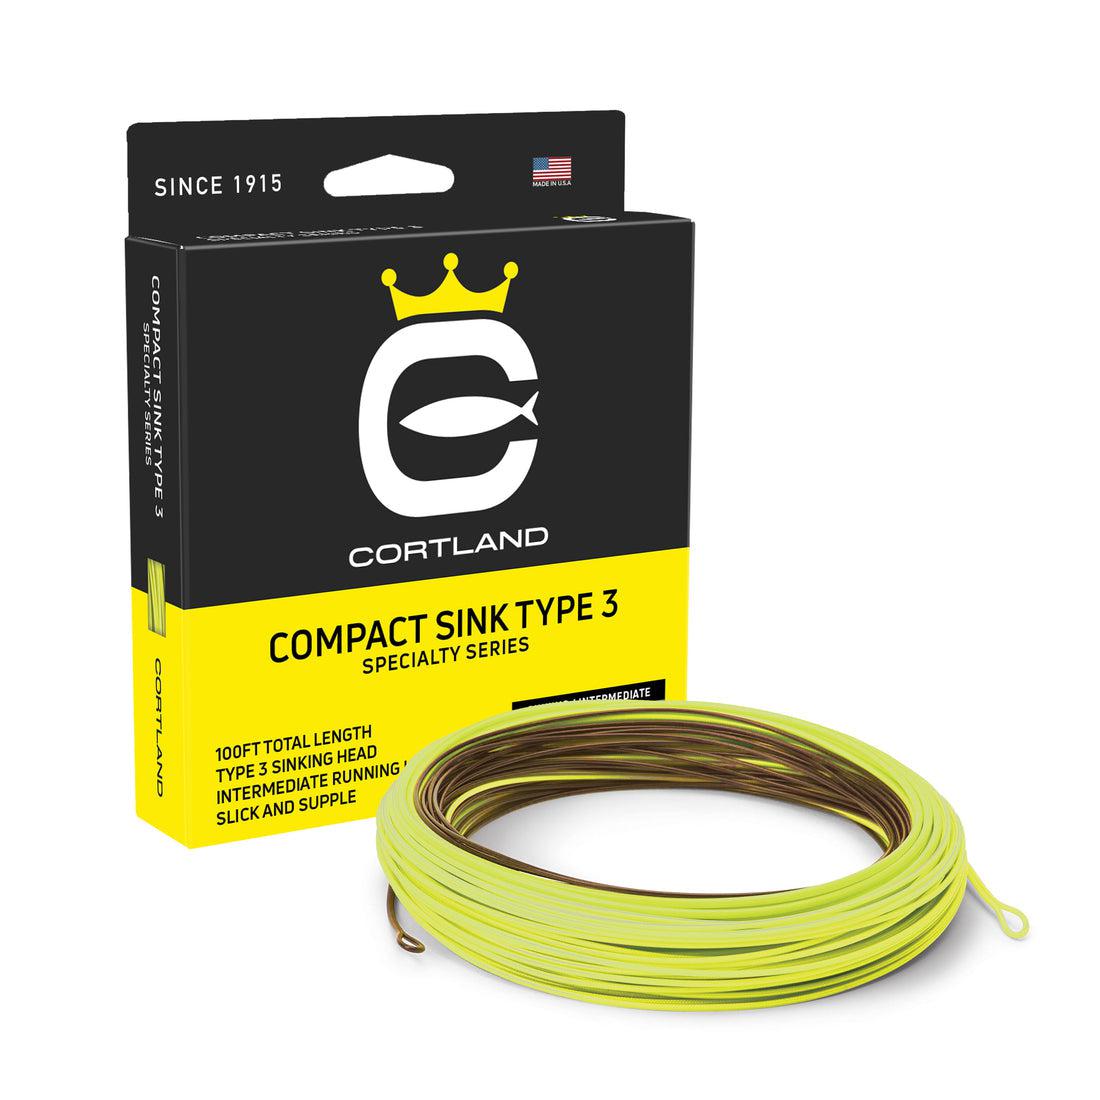 Cortland Compact Specialty Sink Fly Line Type 3 - Brown/Electric Yellow - 11/12